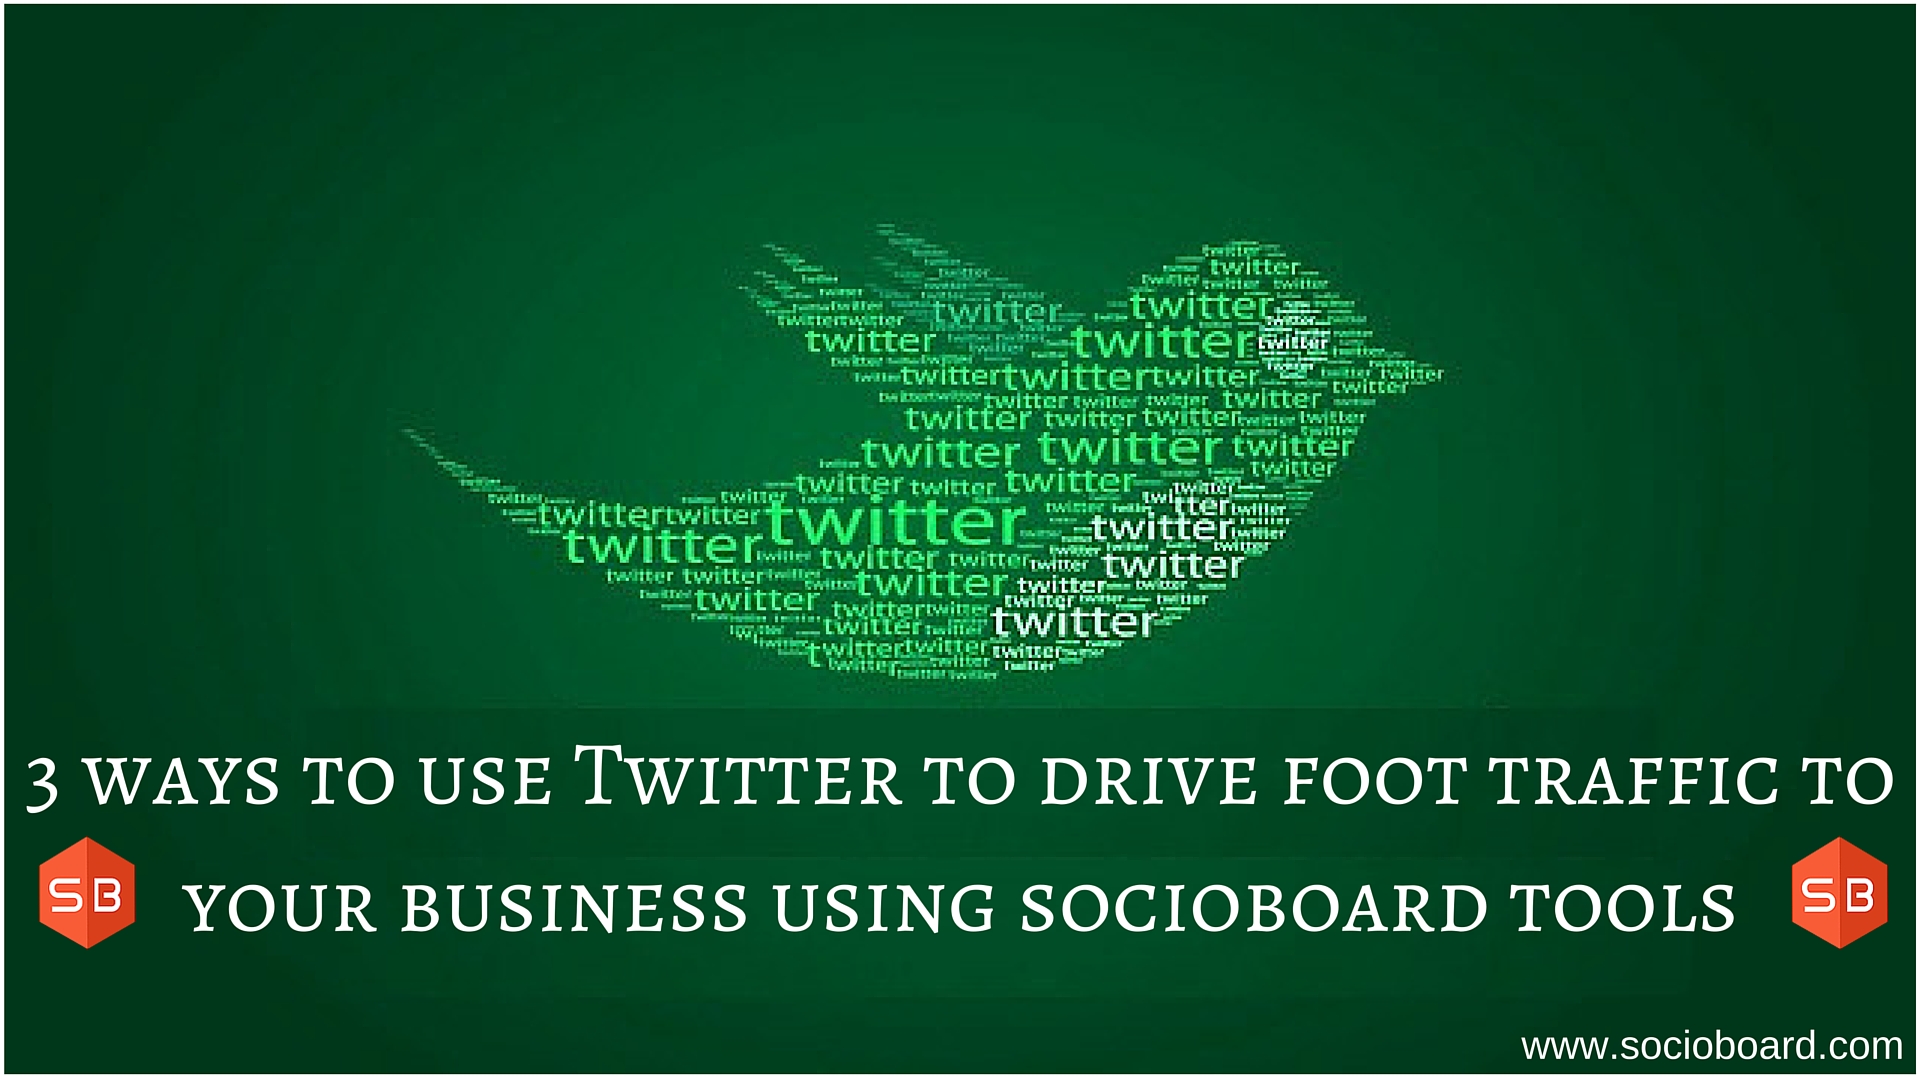 3 ways to use Twitter to drive foot traffic to your business using Socioboard tools in 2021